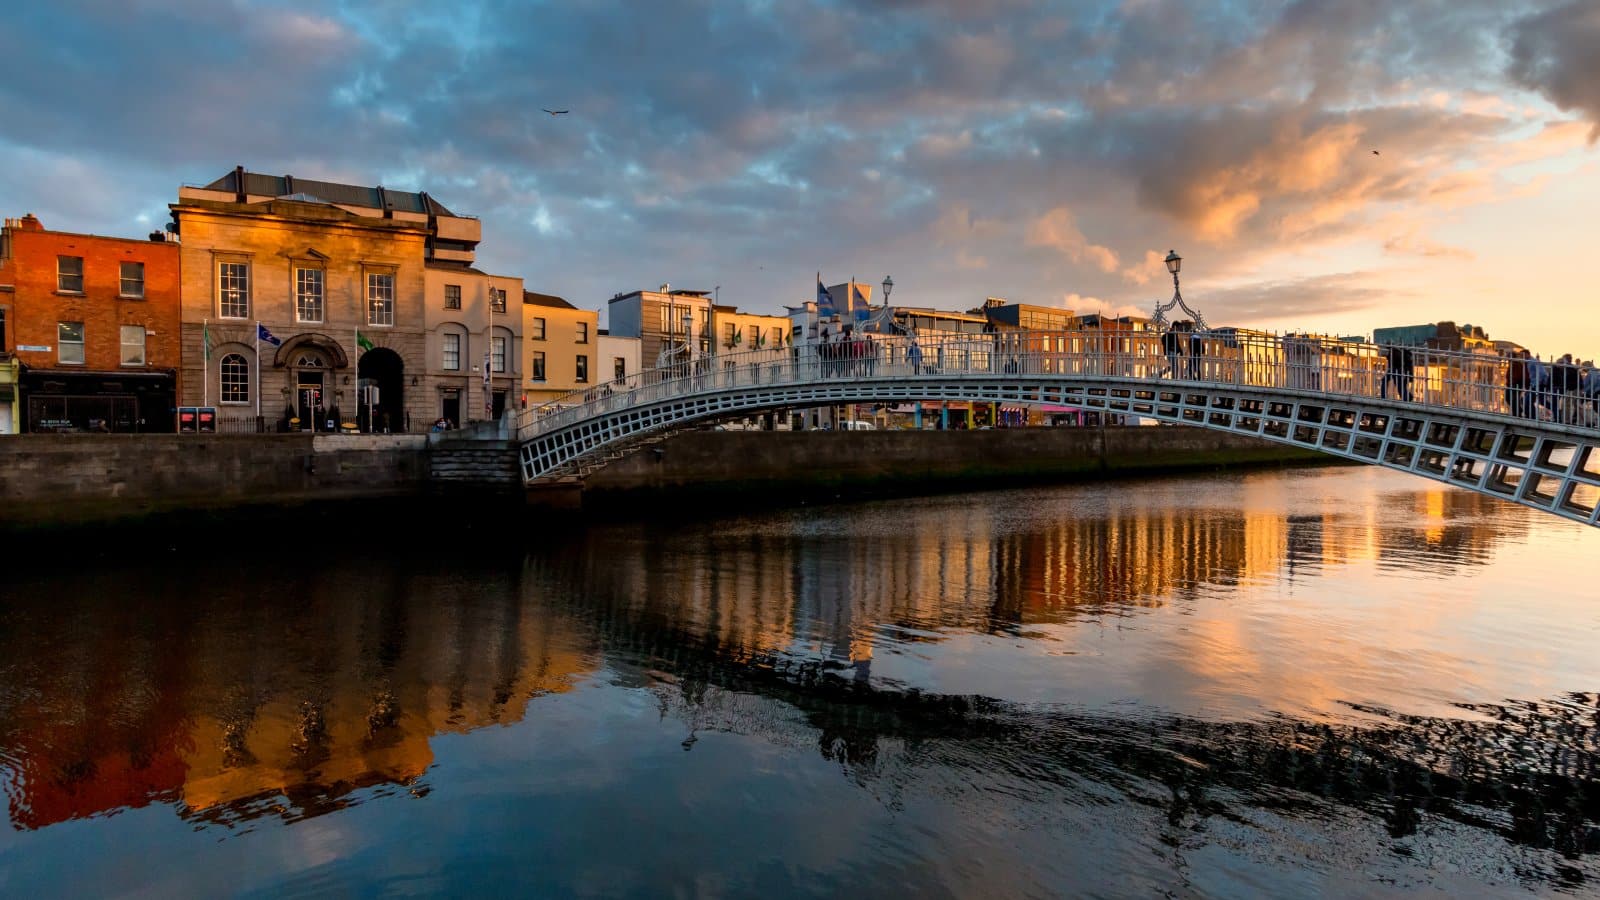 <p class="wp-caption-text">Image Credit: Shutterstock / POM POM</p>  <p>With its rich history and culture, Ireland offers a safe environment and a strong education system, with many schools offering programs in English.</p>